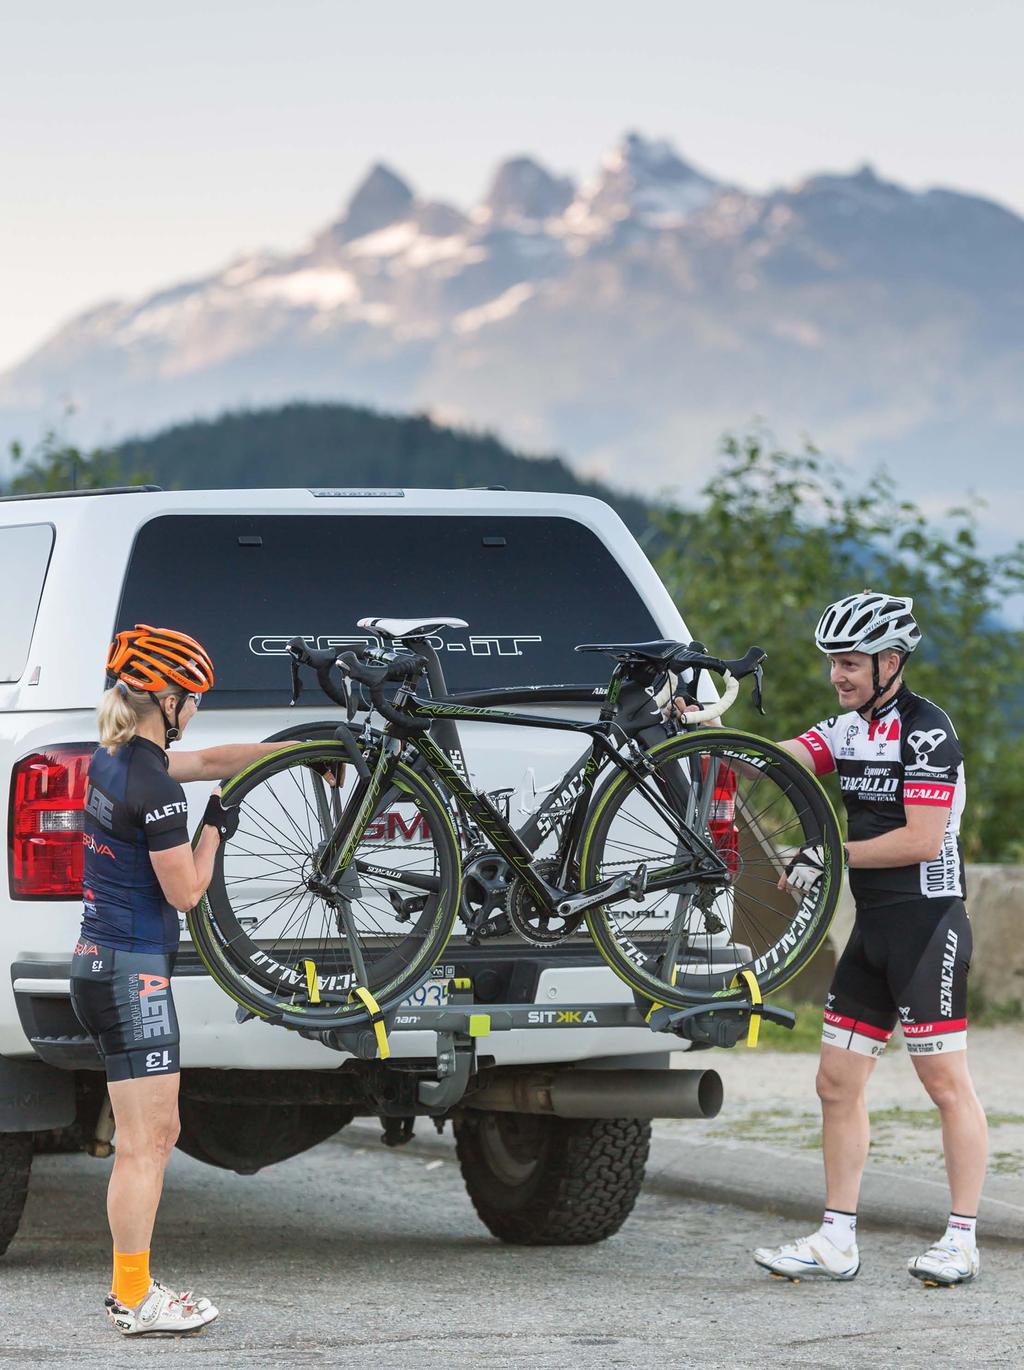 This sleek looking rack provides the flexibility riders need when hauling either a super-light triathlon bike or a rugged fat bike using